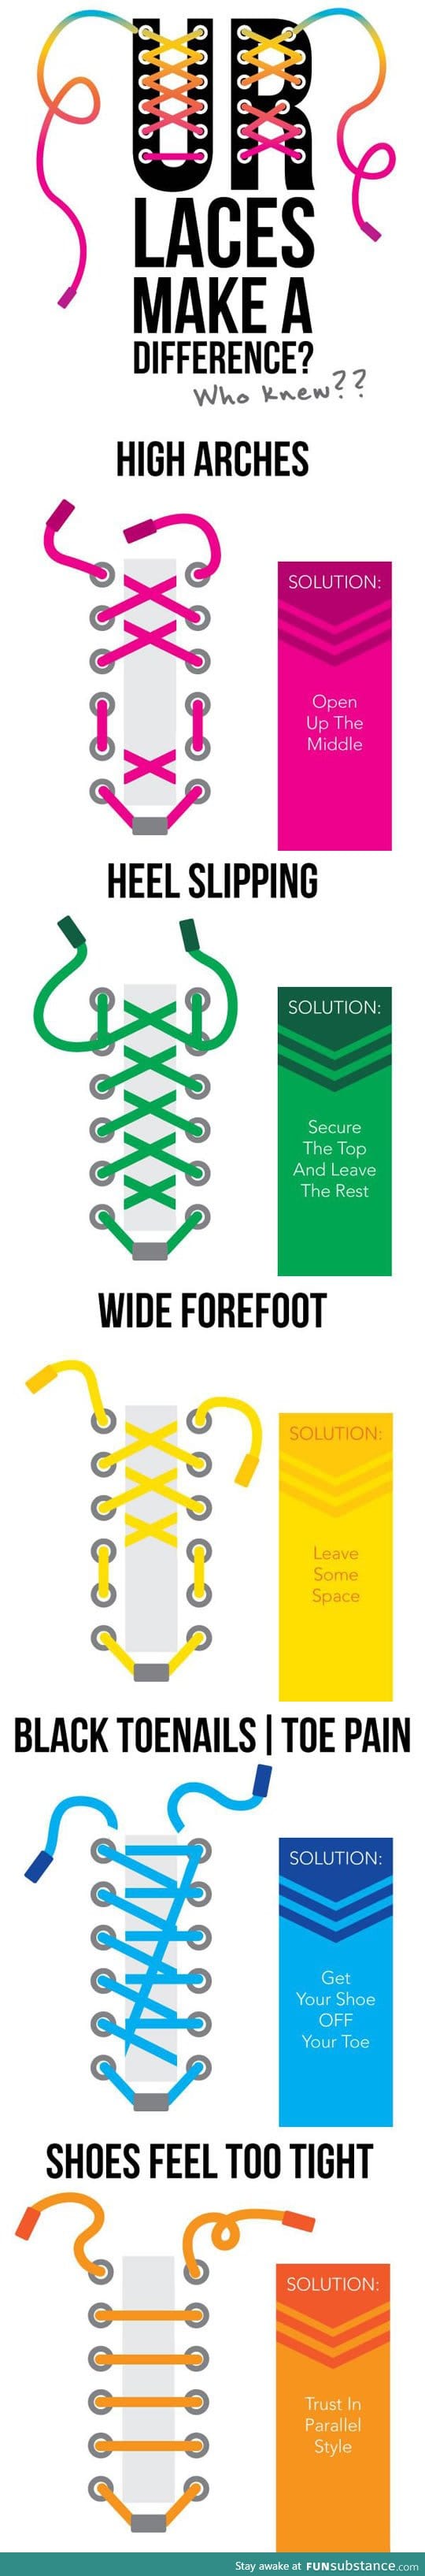 How to lace shoes for proper fit